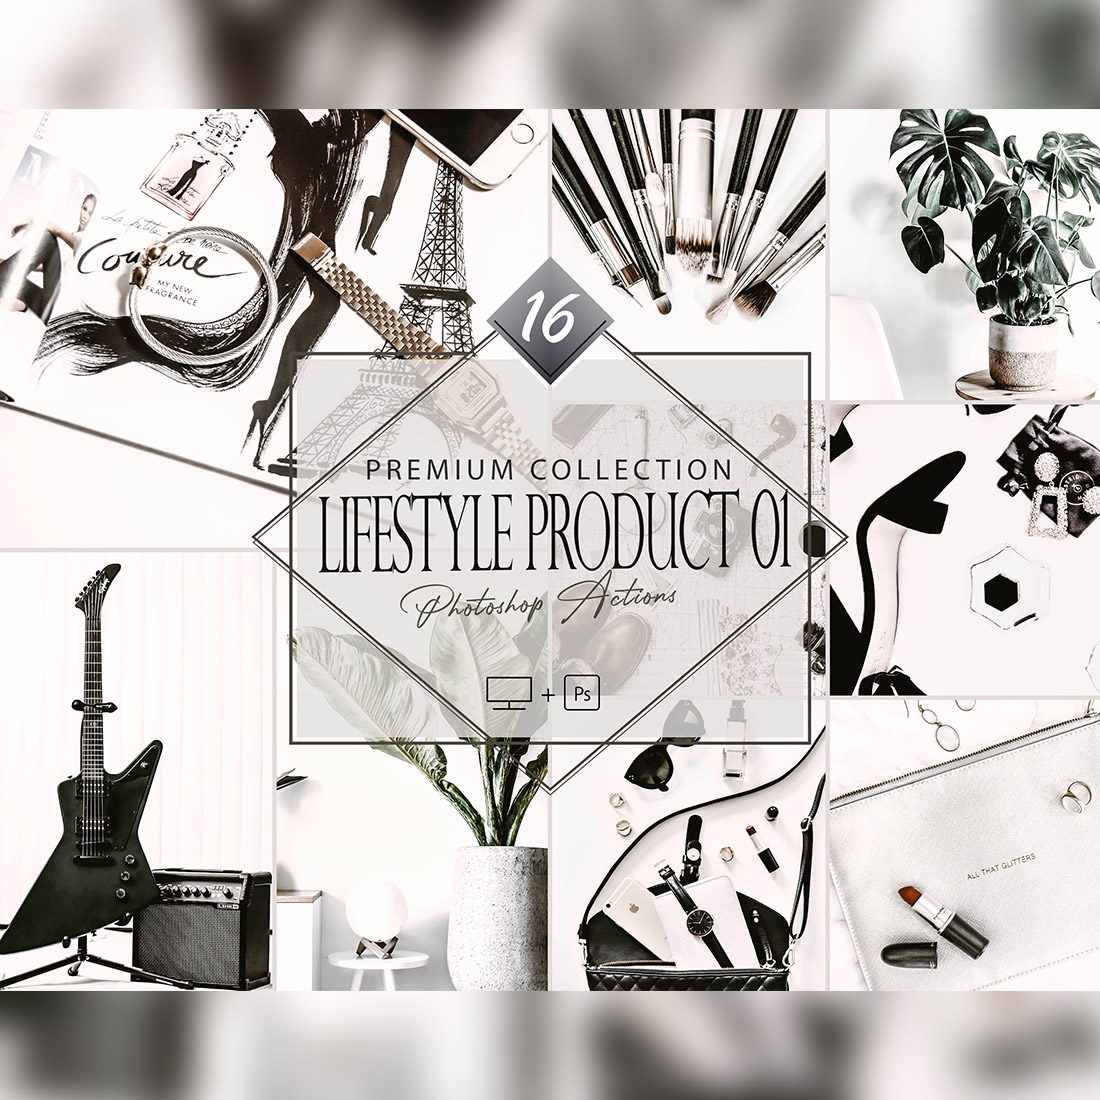 16 Lifestyle Product 01 Photoshop Actions, Flatlay ACR Preset, Bright Items Ps Filter, Portrait And Accessory Theme For Instagram, Blogger cover image.